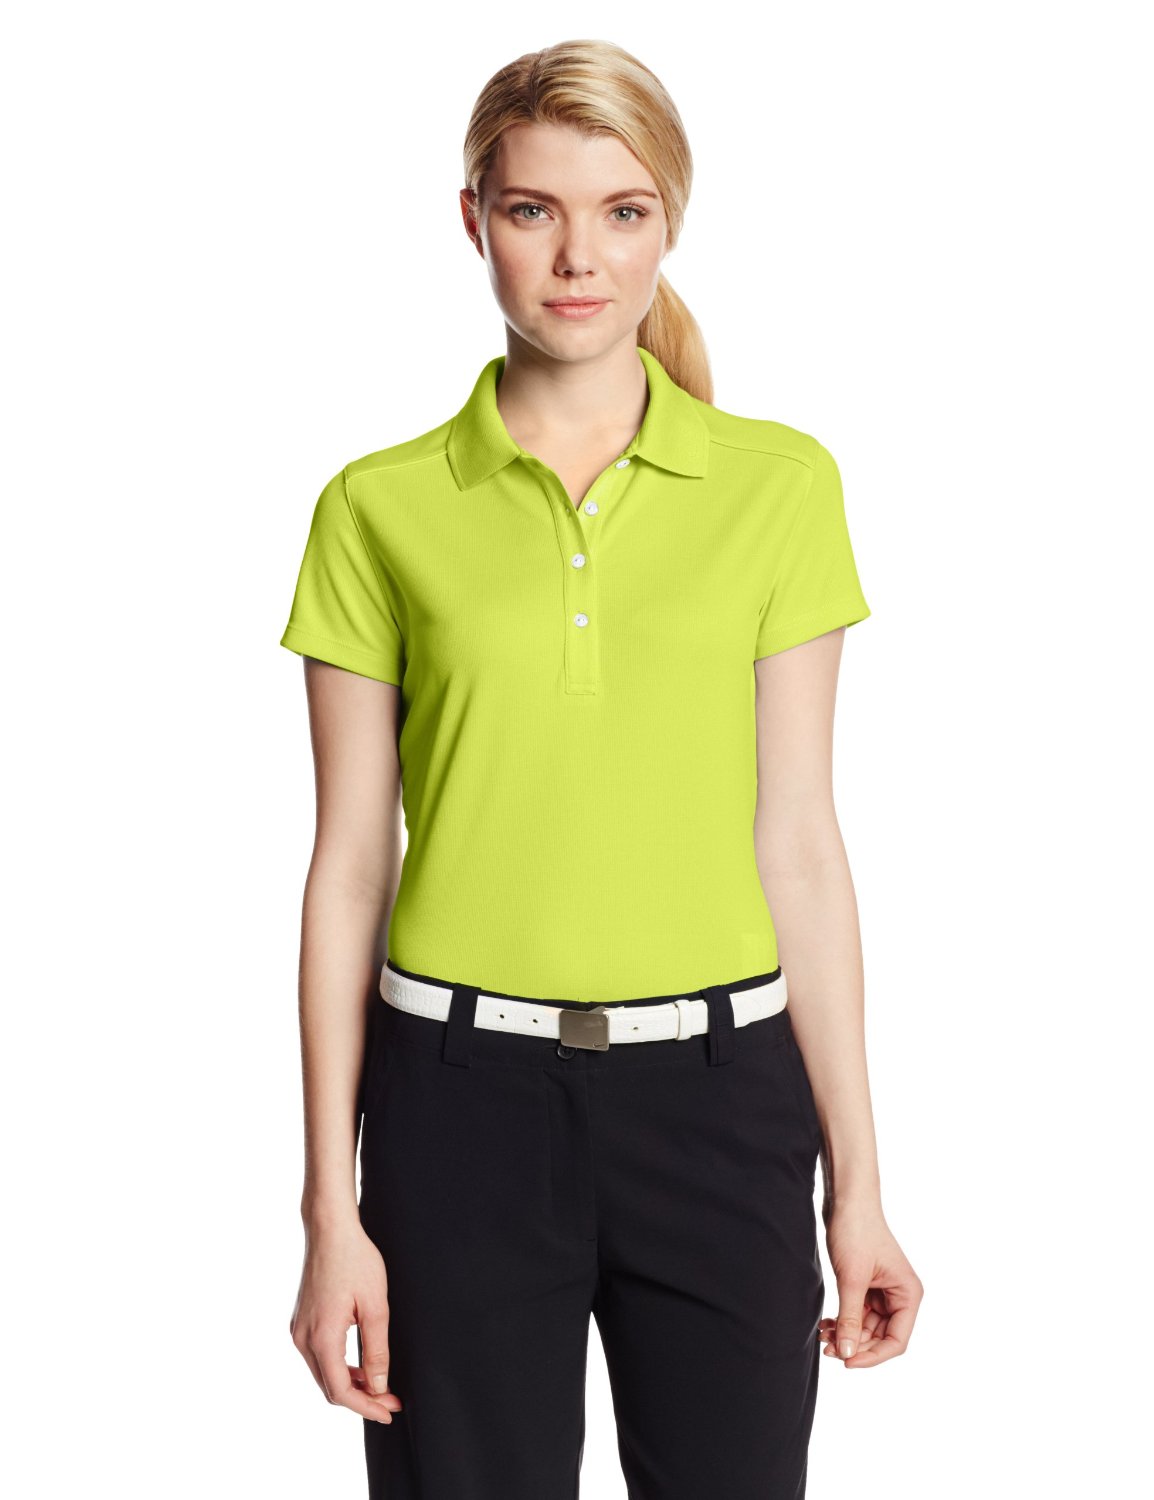 Womens Callaway Solid Double Knit Short Sleeve Golf Polo Shirts